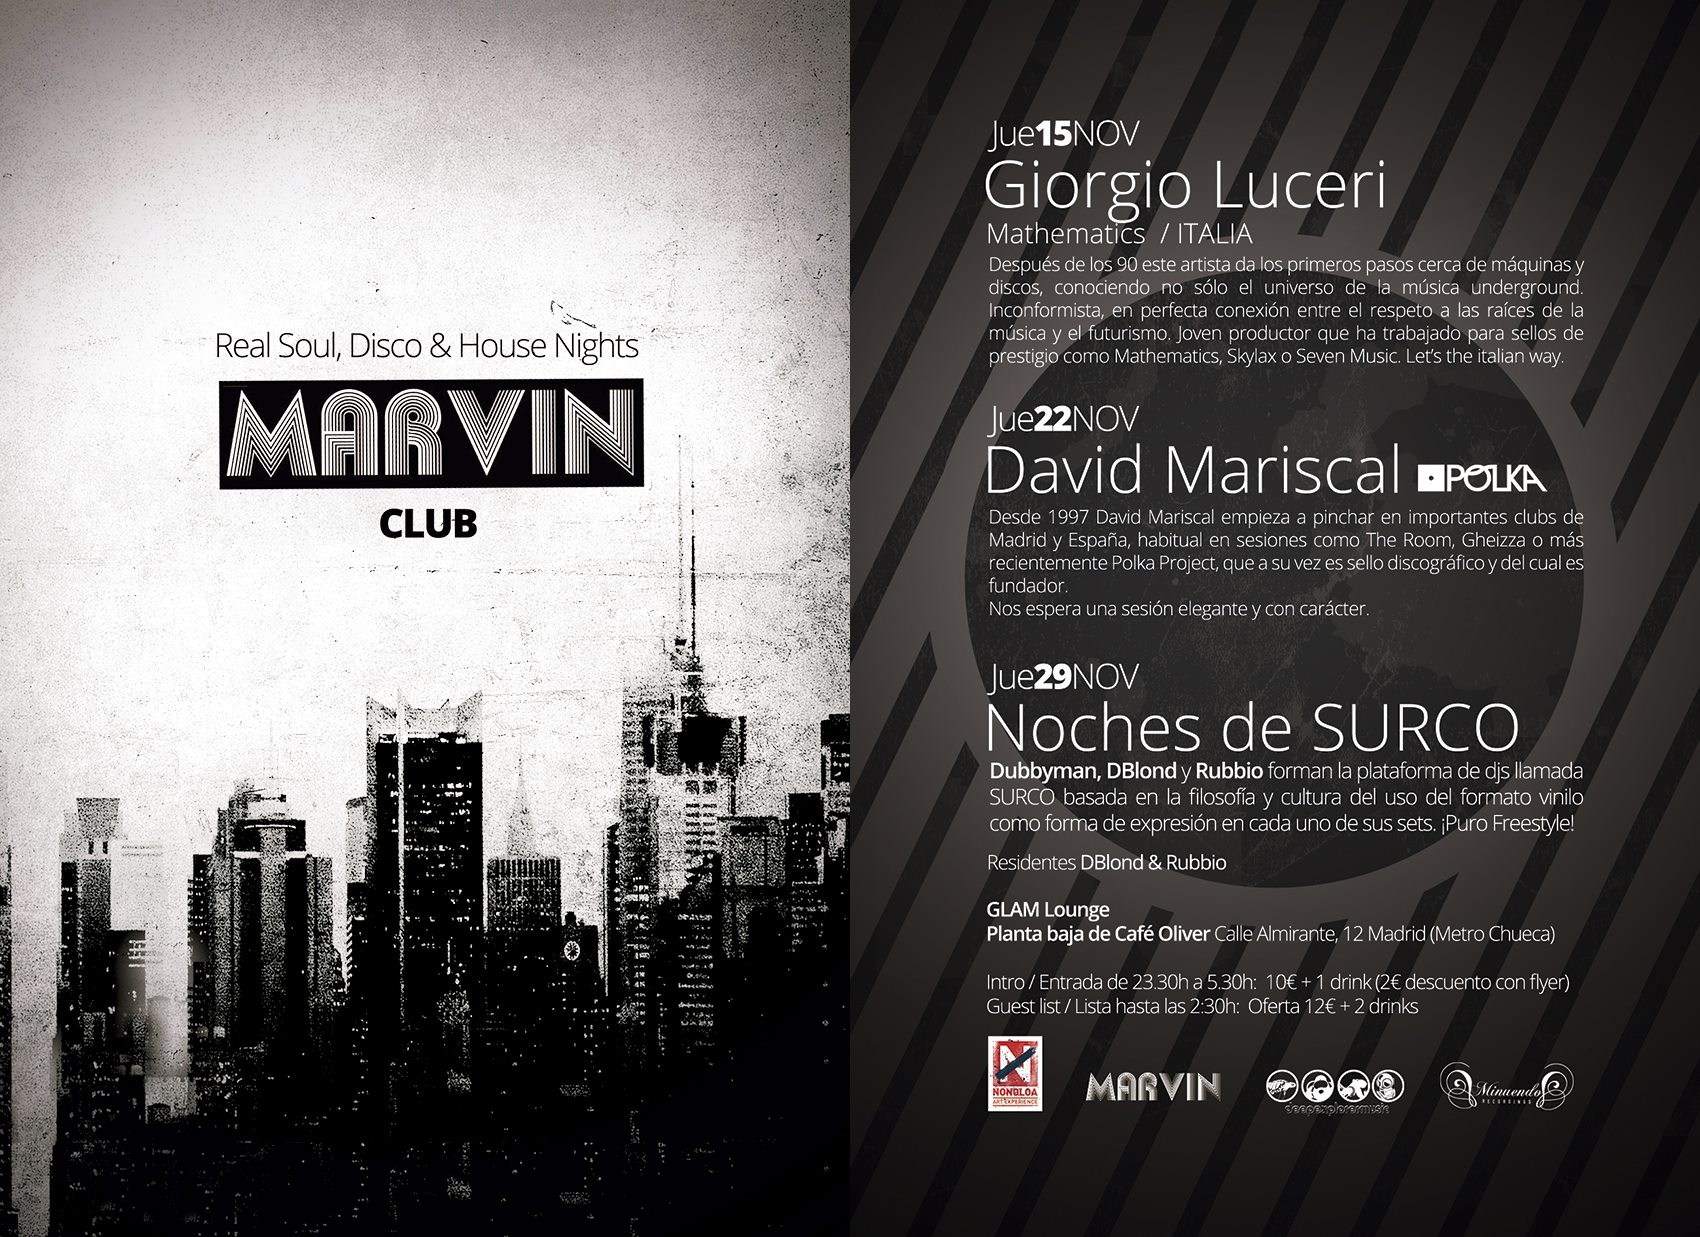 Marvin Club at Glam Lounge, Madrid